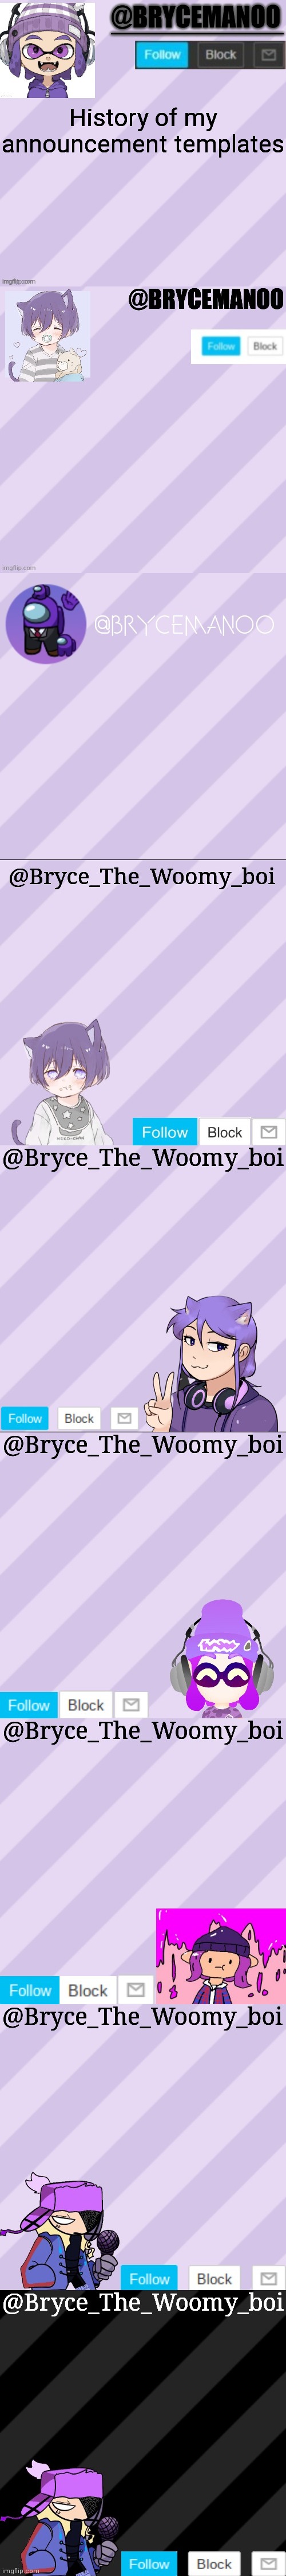 There's 9. | History of my announcement templates | image tagged in brycemanoo announcement temple,brycemanoo new announcement template,brycemanoo new new announcement template,bryce_the_woomy_boi | made w/ Imgflip meme maker